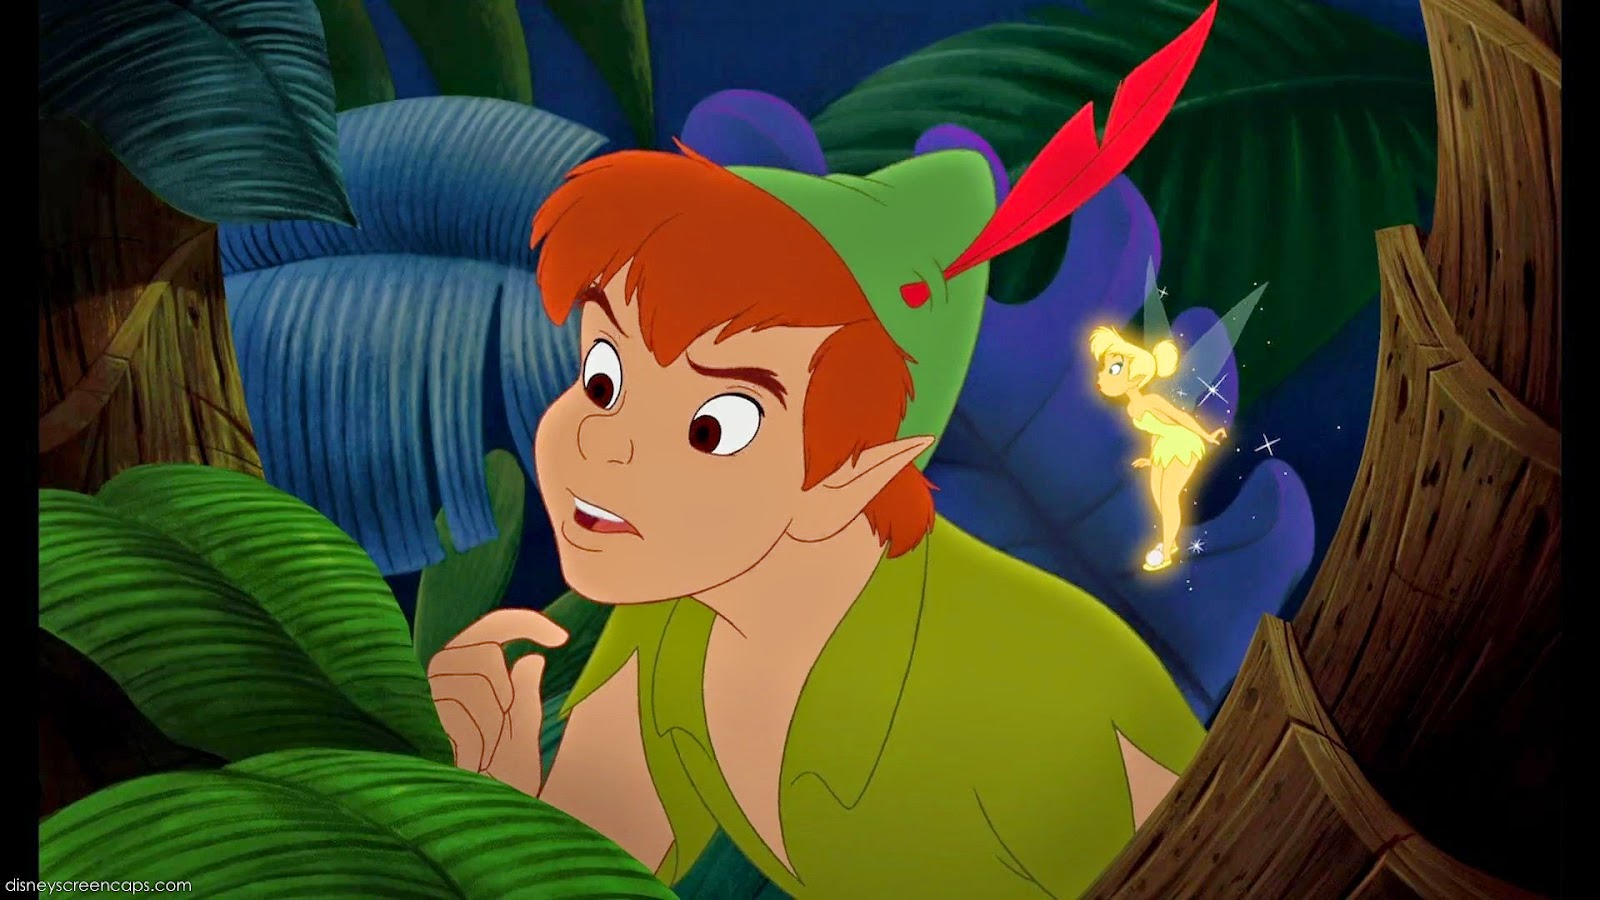 Bobby Rivers TV: She's Your New Peter Pan
